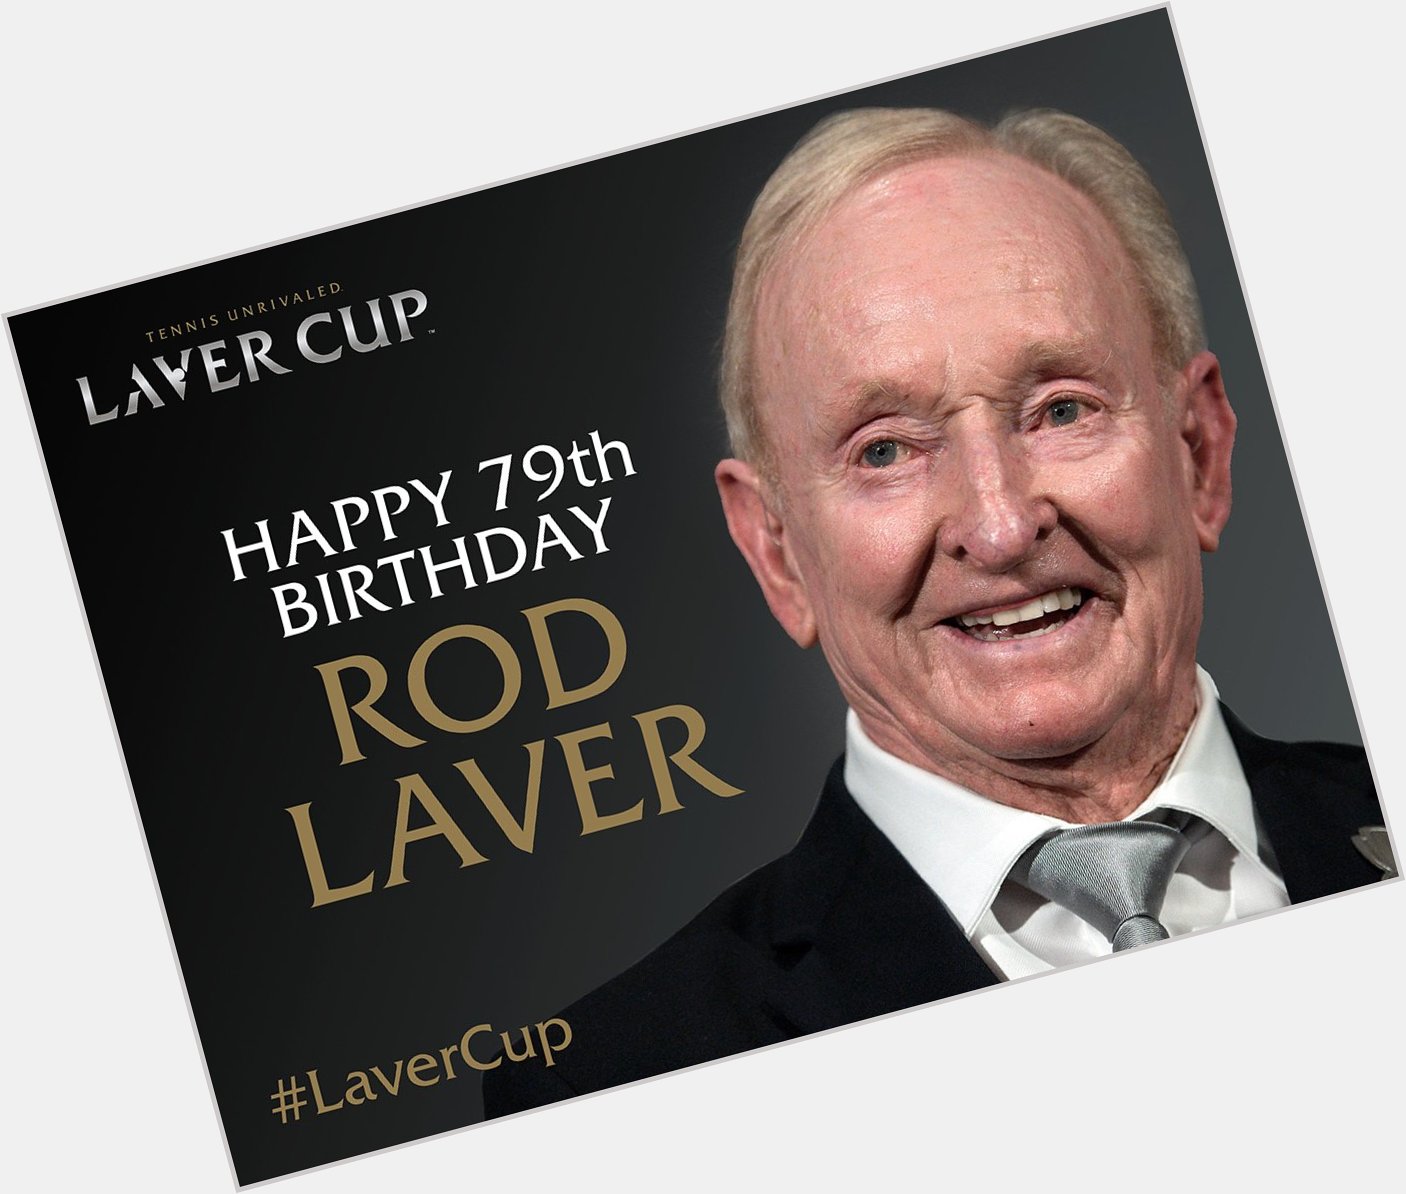 Happy birthday to Rod Laver, the man whose legend the honours. 